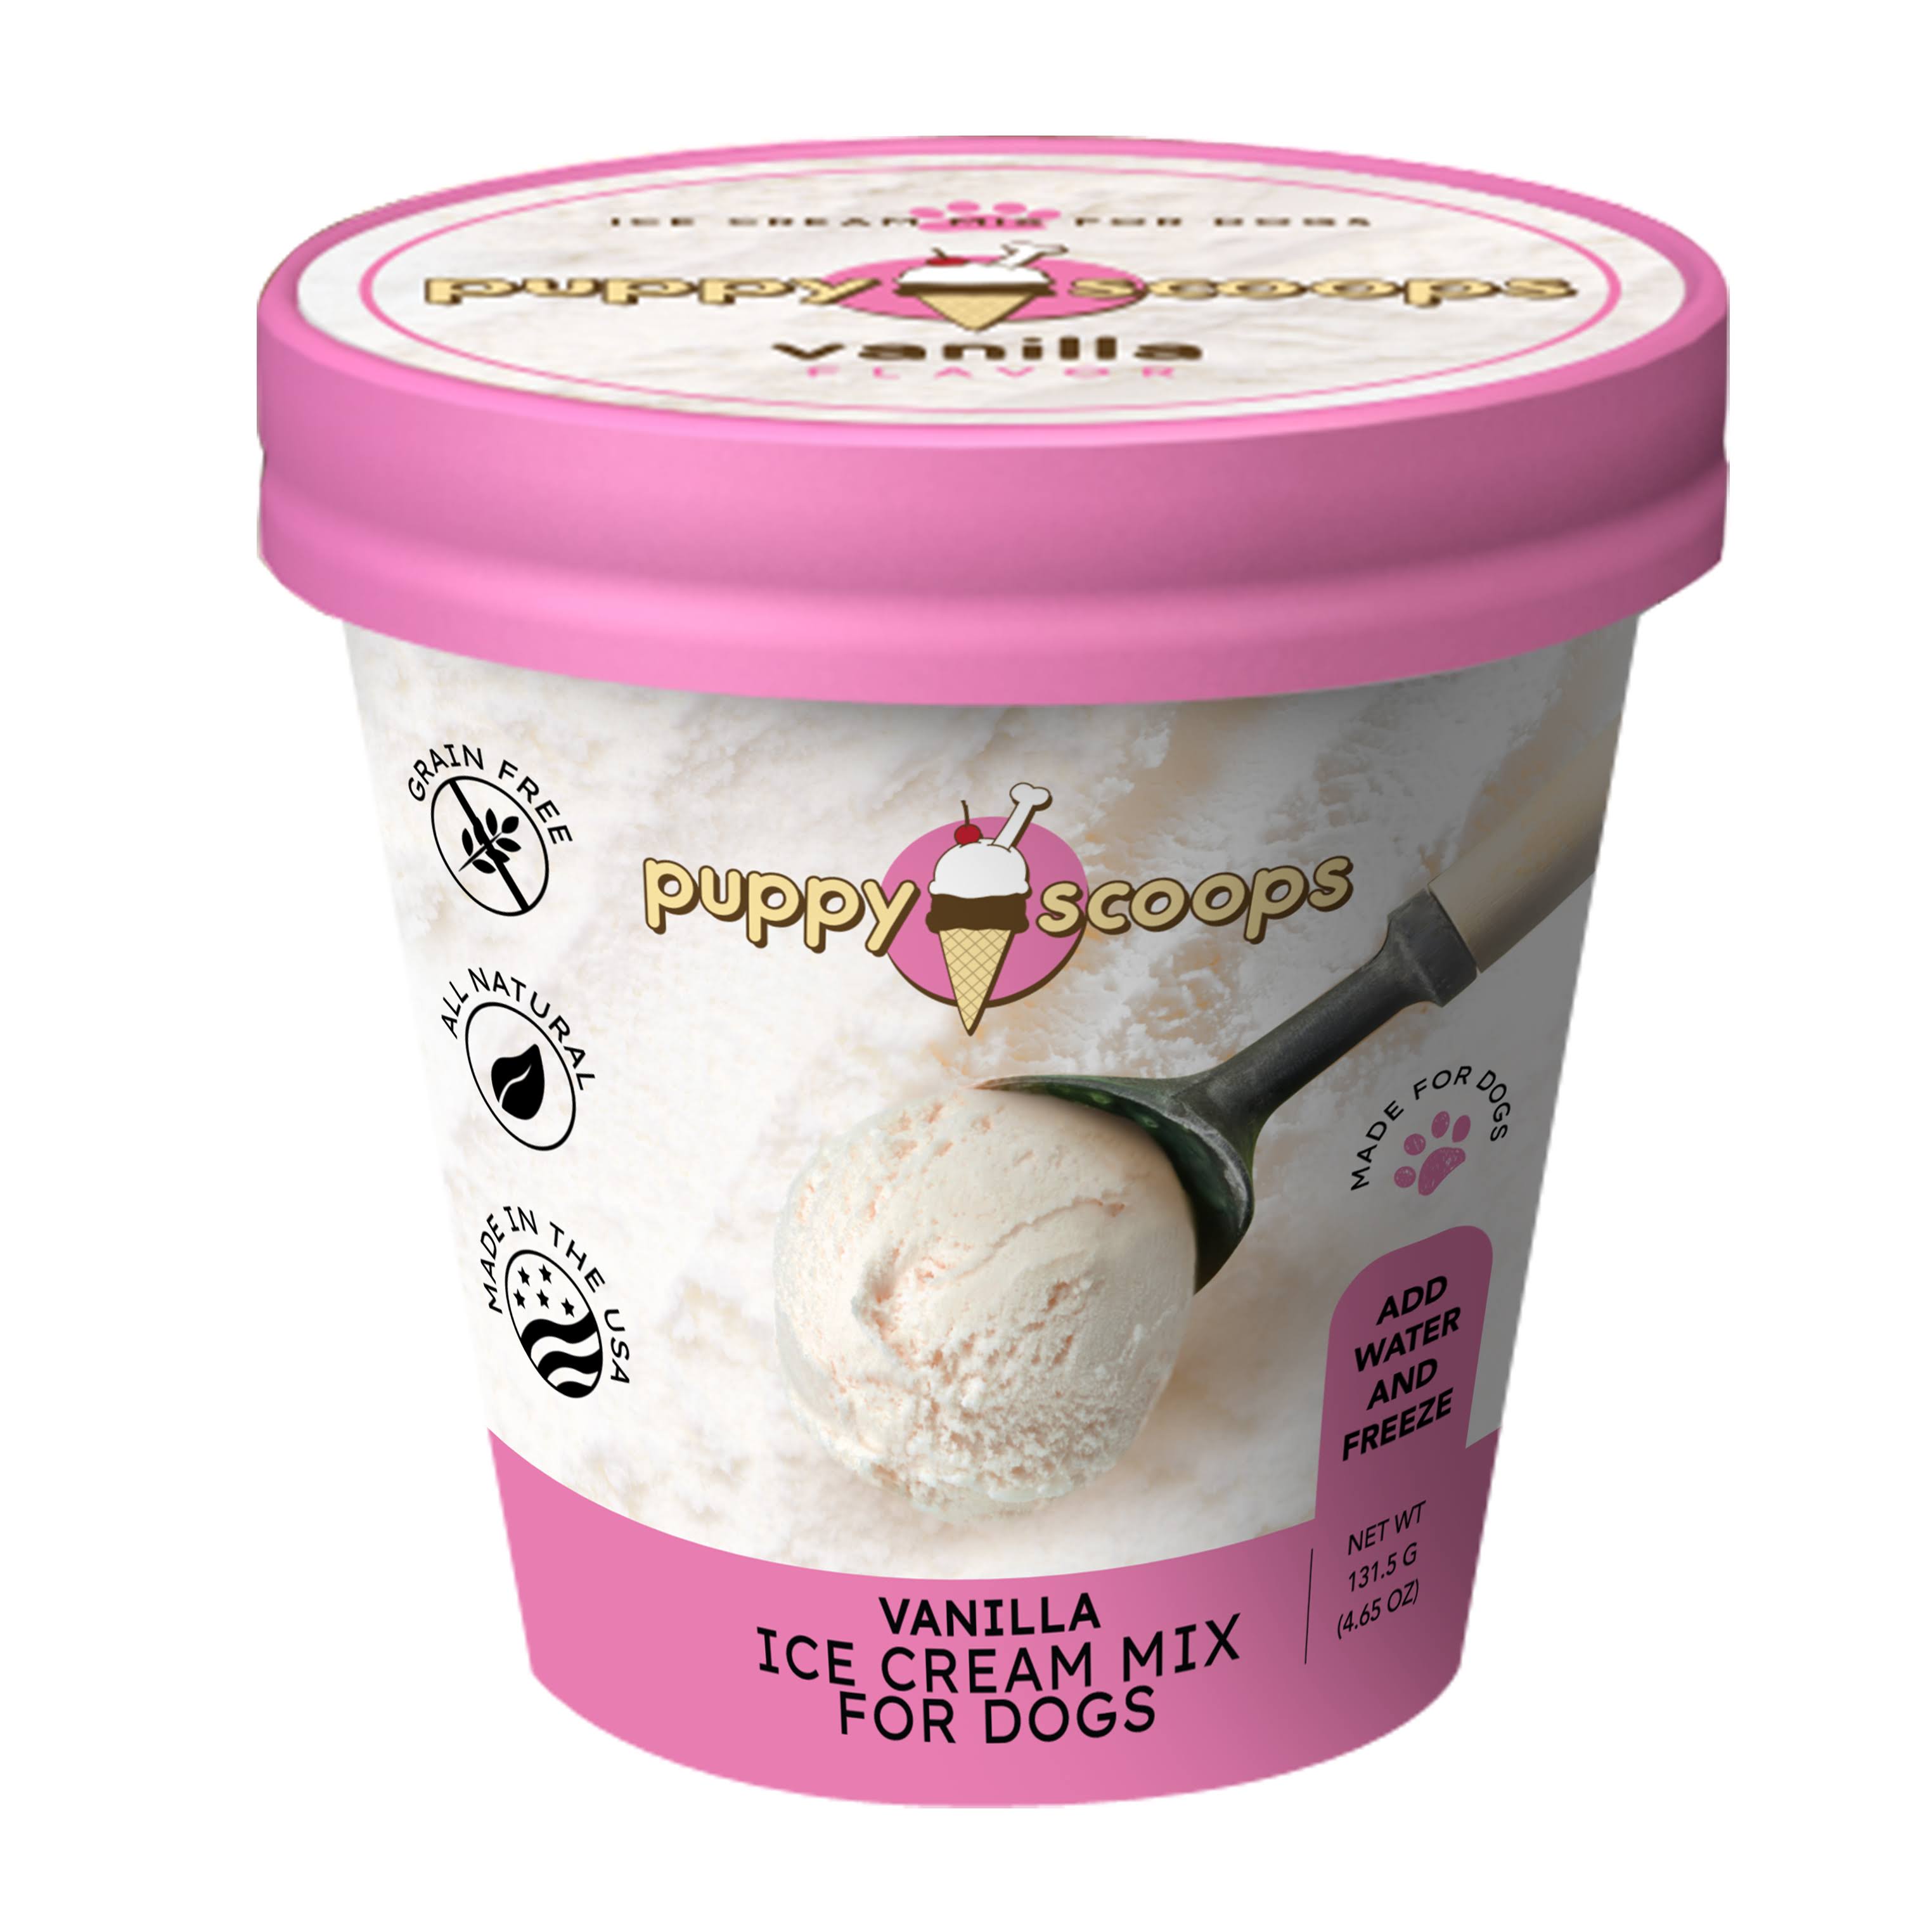 Puppy Scoops Ice Cream Mix for Dogs and Puppies - Vanilla Flavor, 6oz